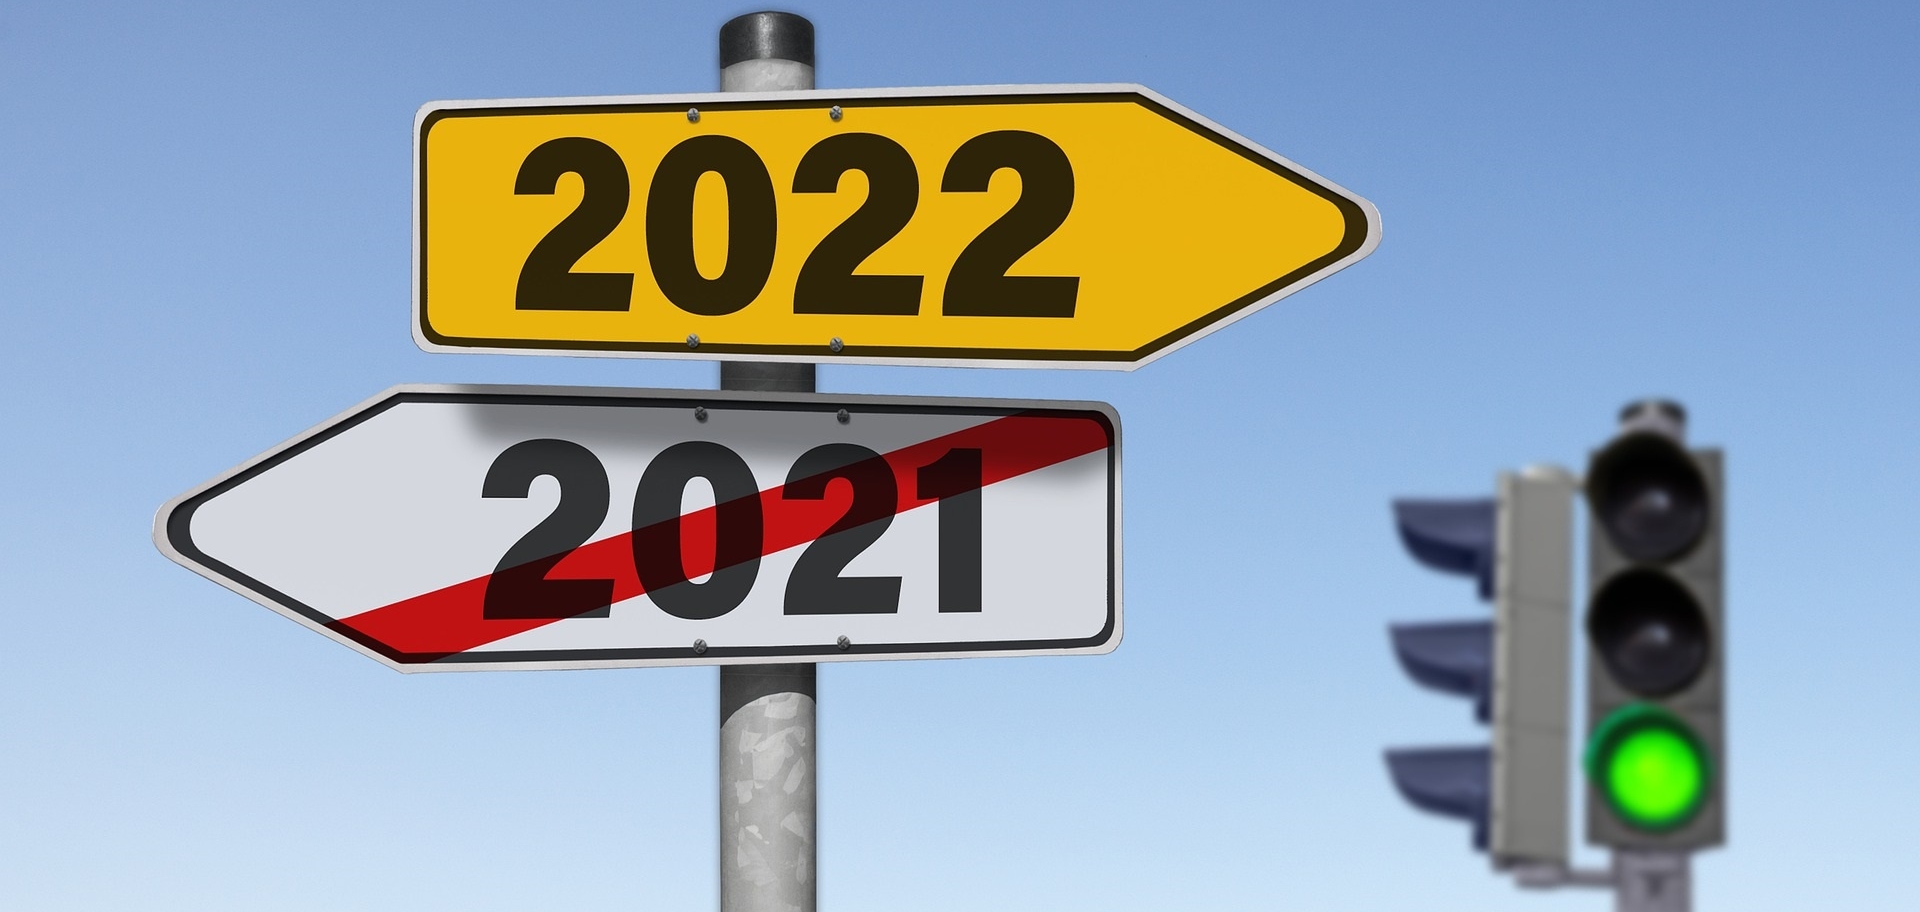 a sign showing 2022 point right and 2021 point to the left